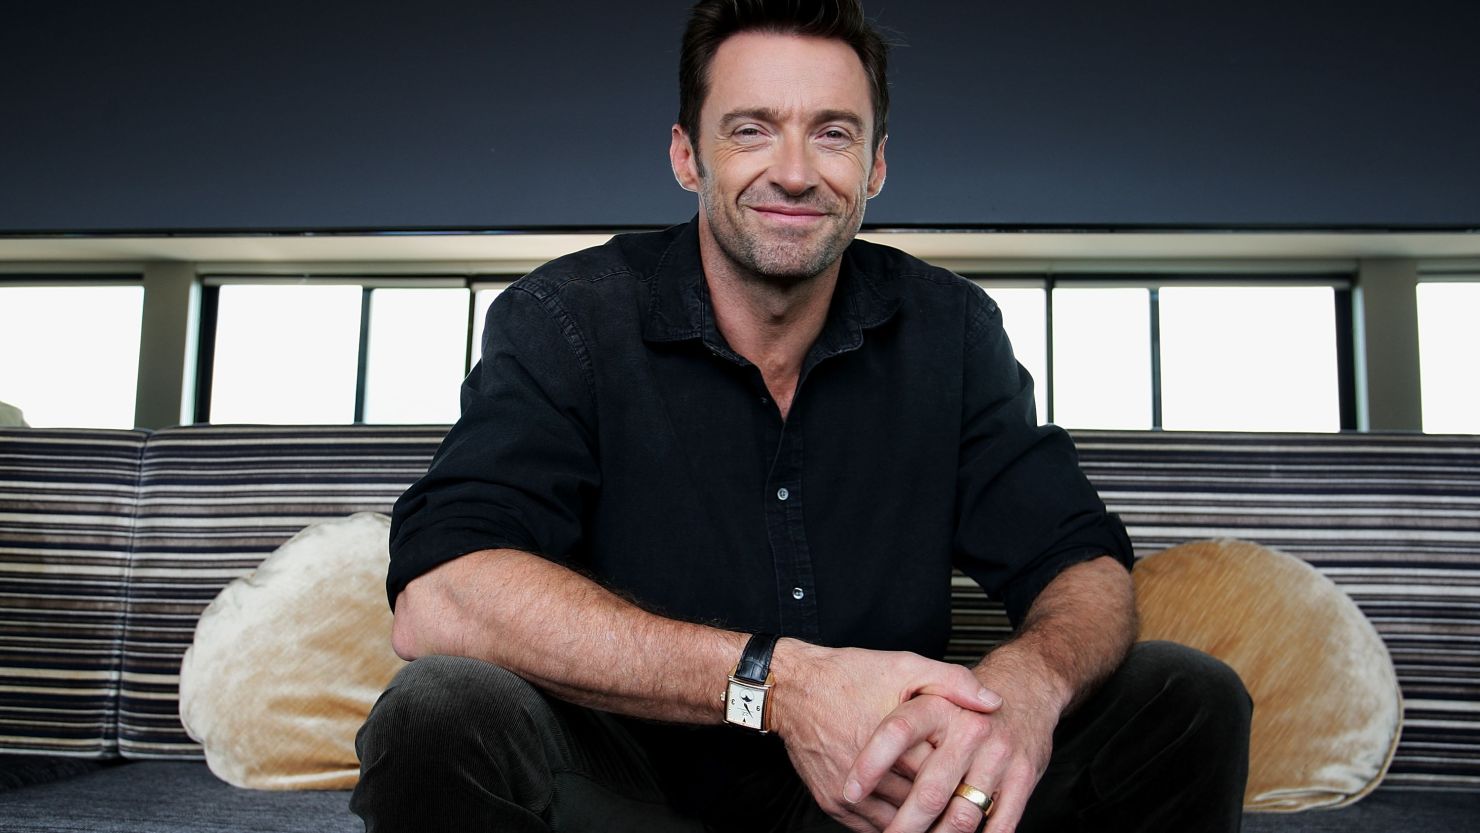 "I was mainly inspired by Paul Newman on the business level and what he did," Hugh Jackman said.